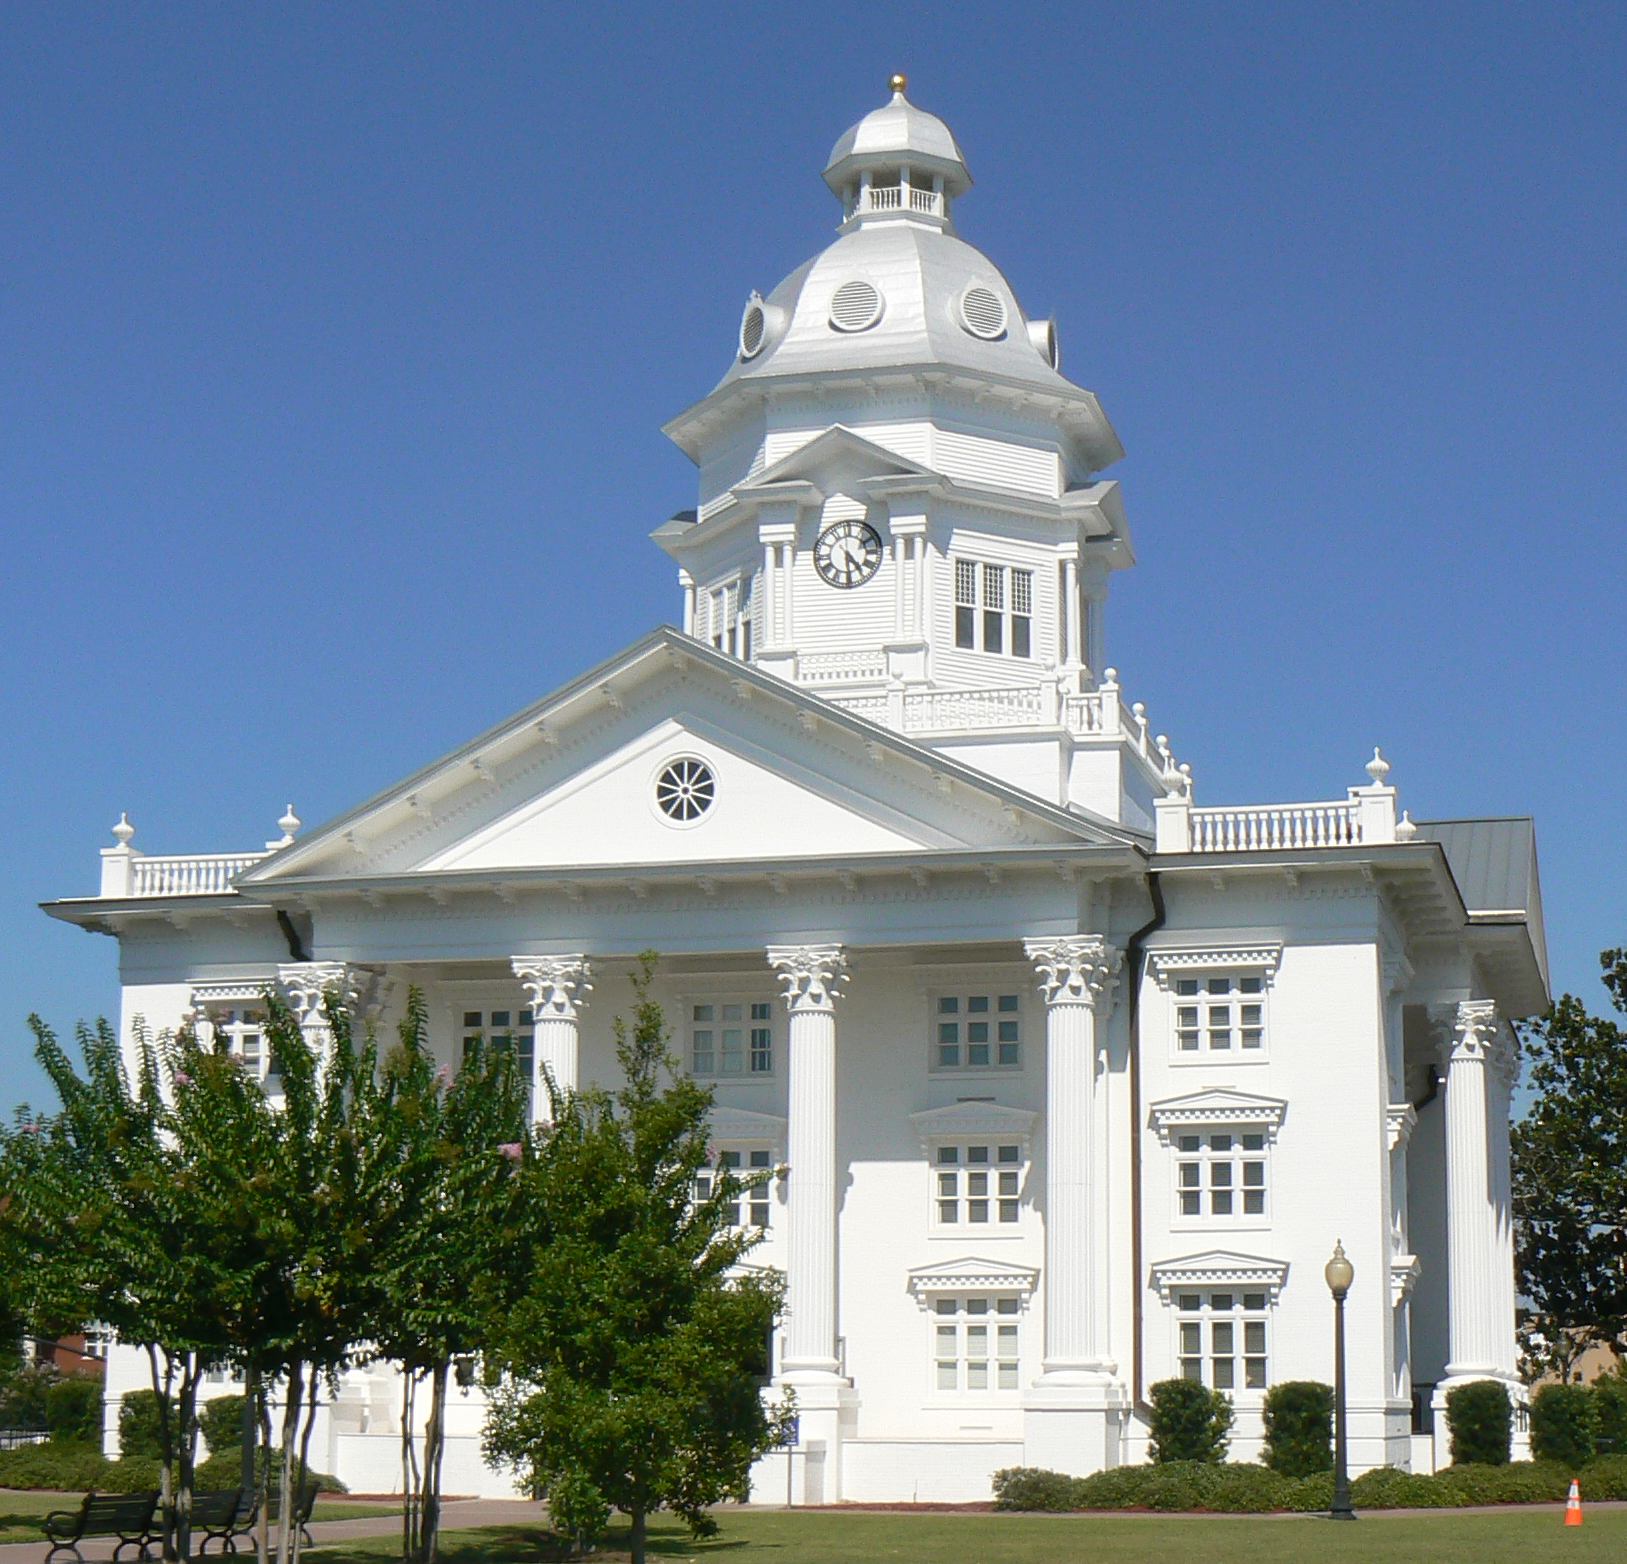 Image of Colquitt County Courthouse